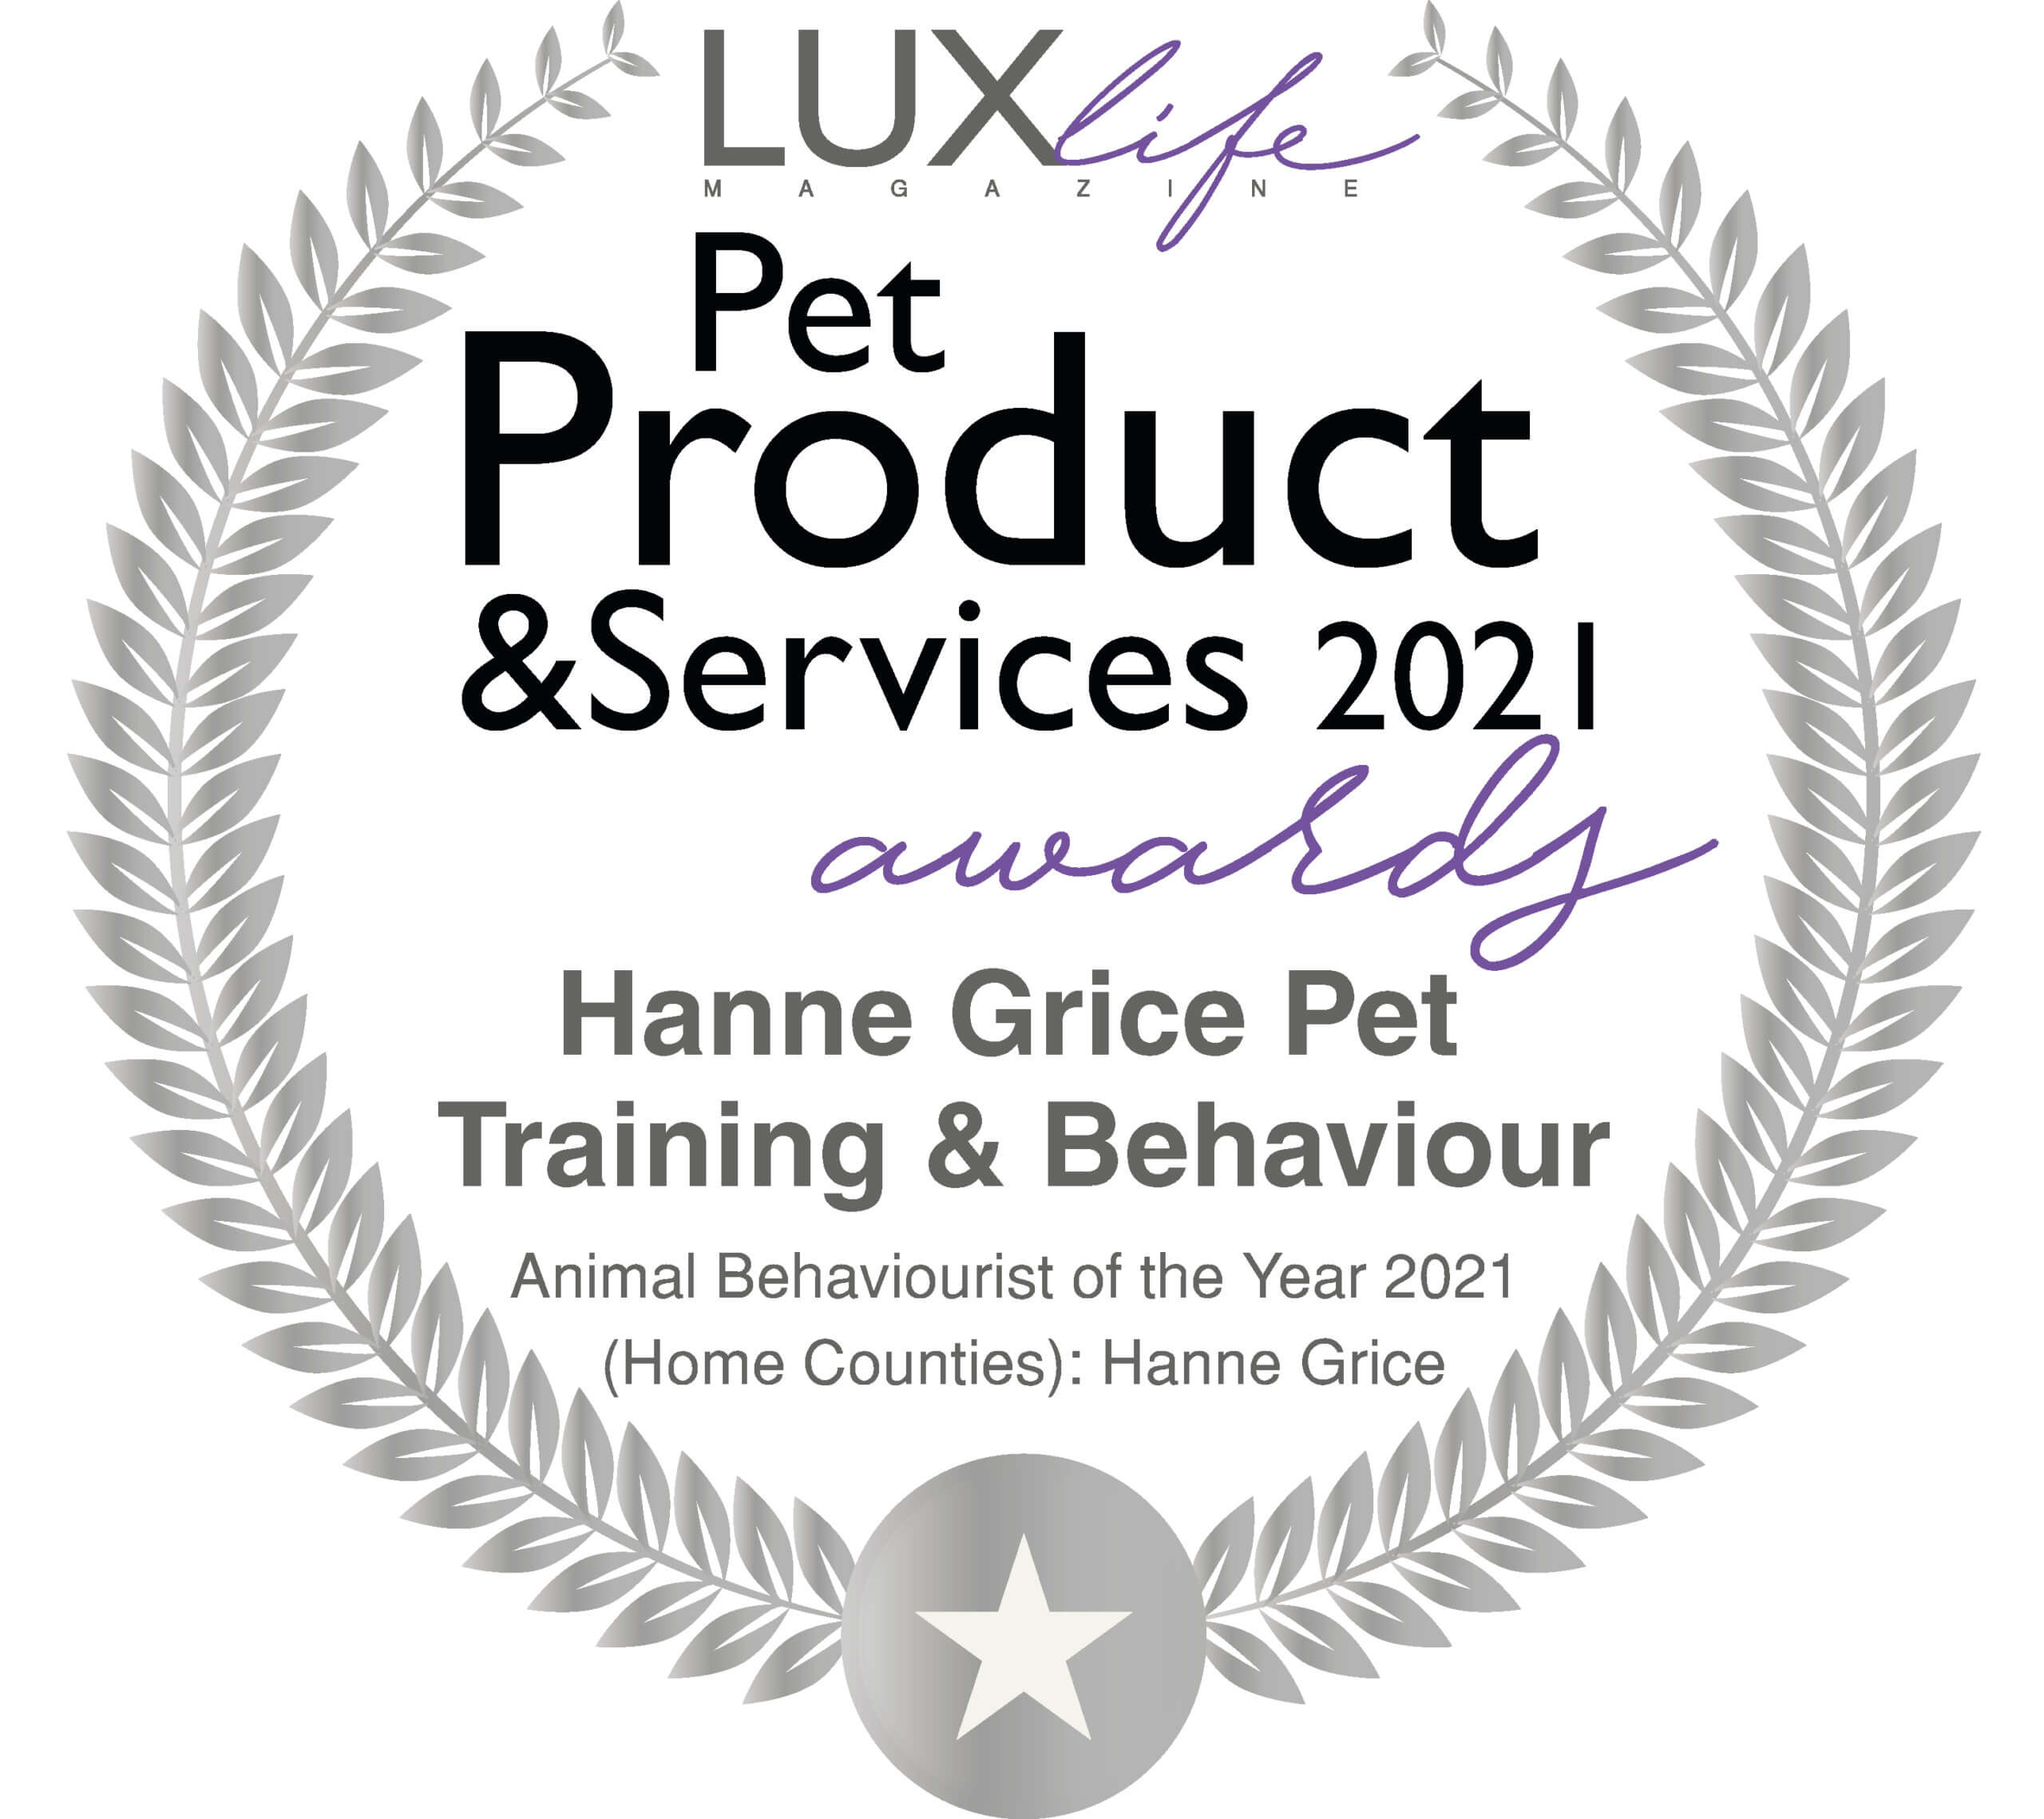 Lux Pet Product and Services 2021 award